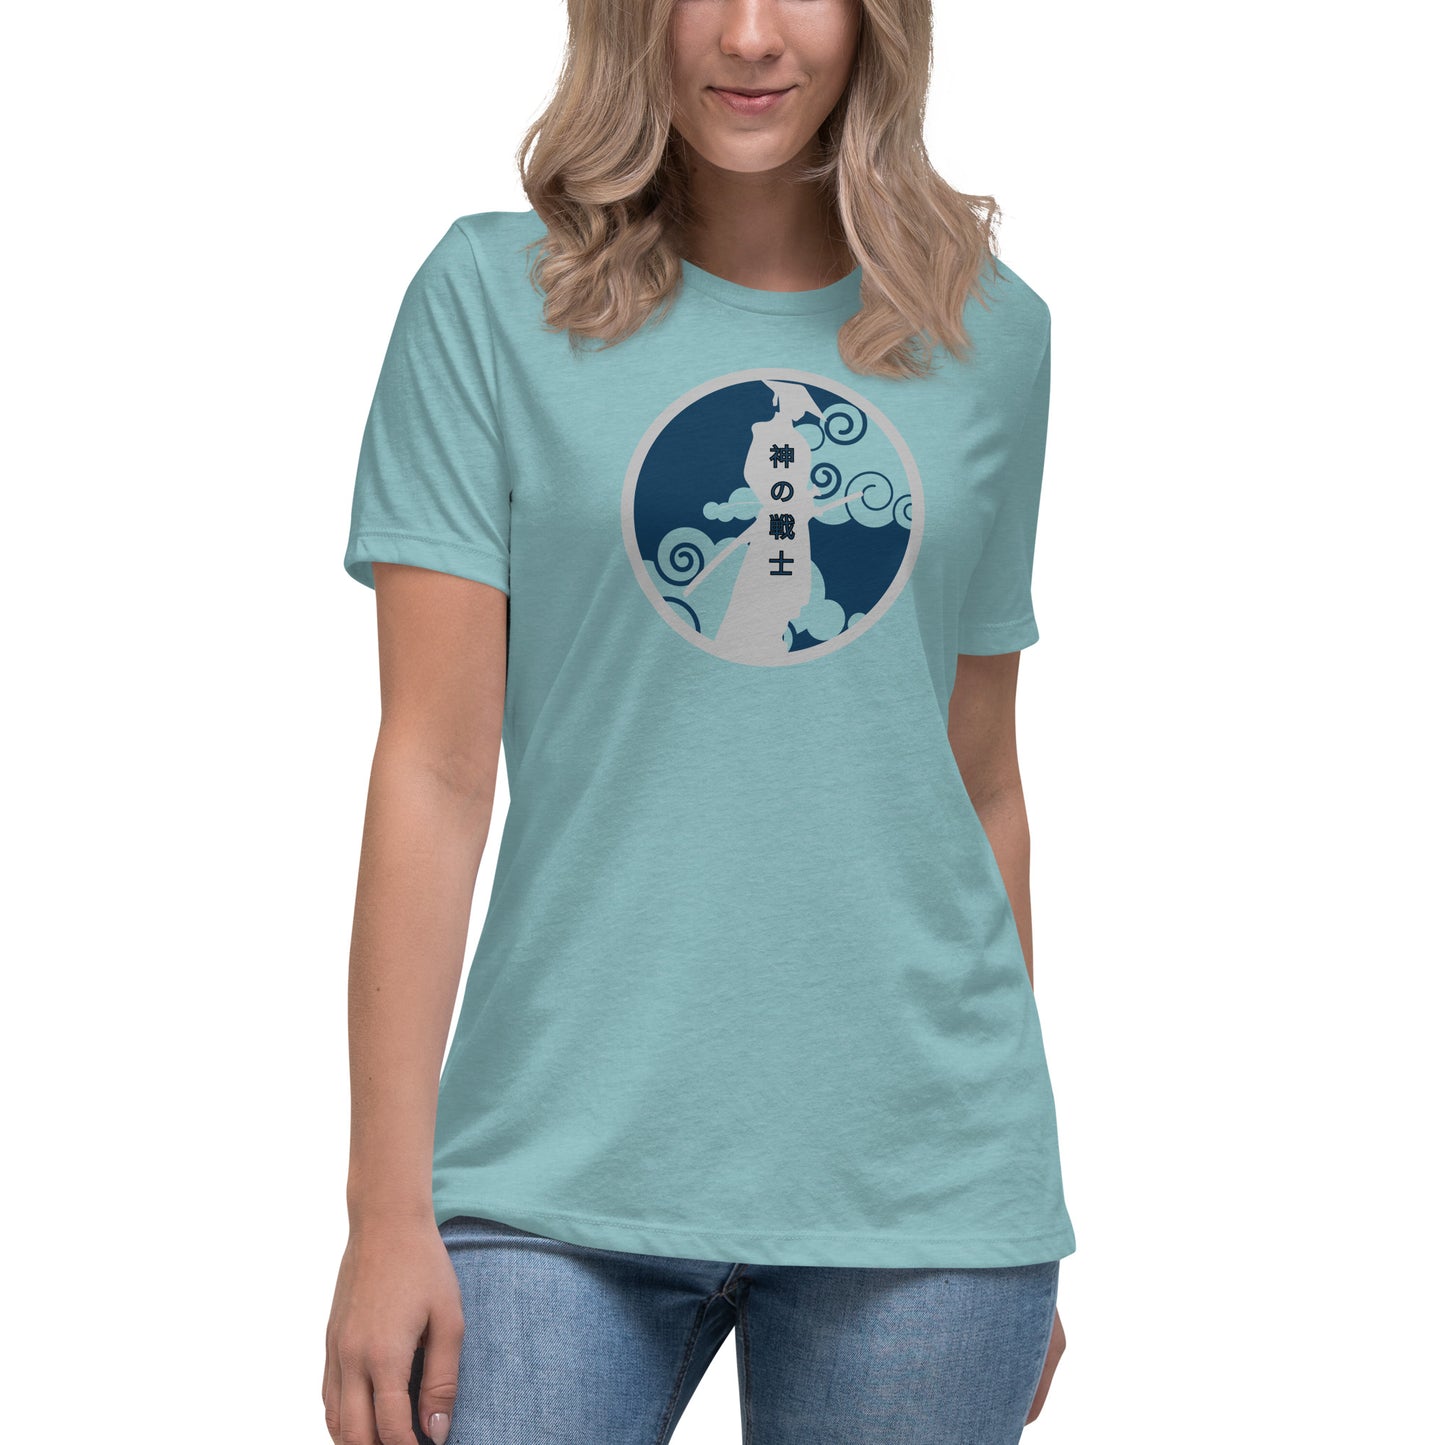 GOD'S WARRIOR Blue and Silver (Japanese) Women's Relaxed T-Shirt